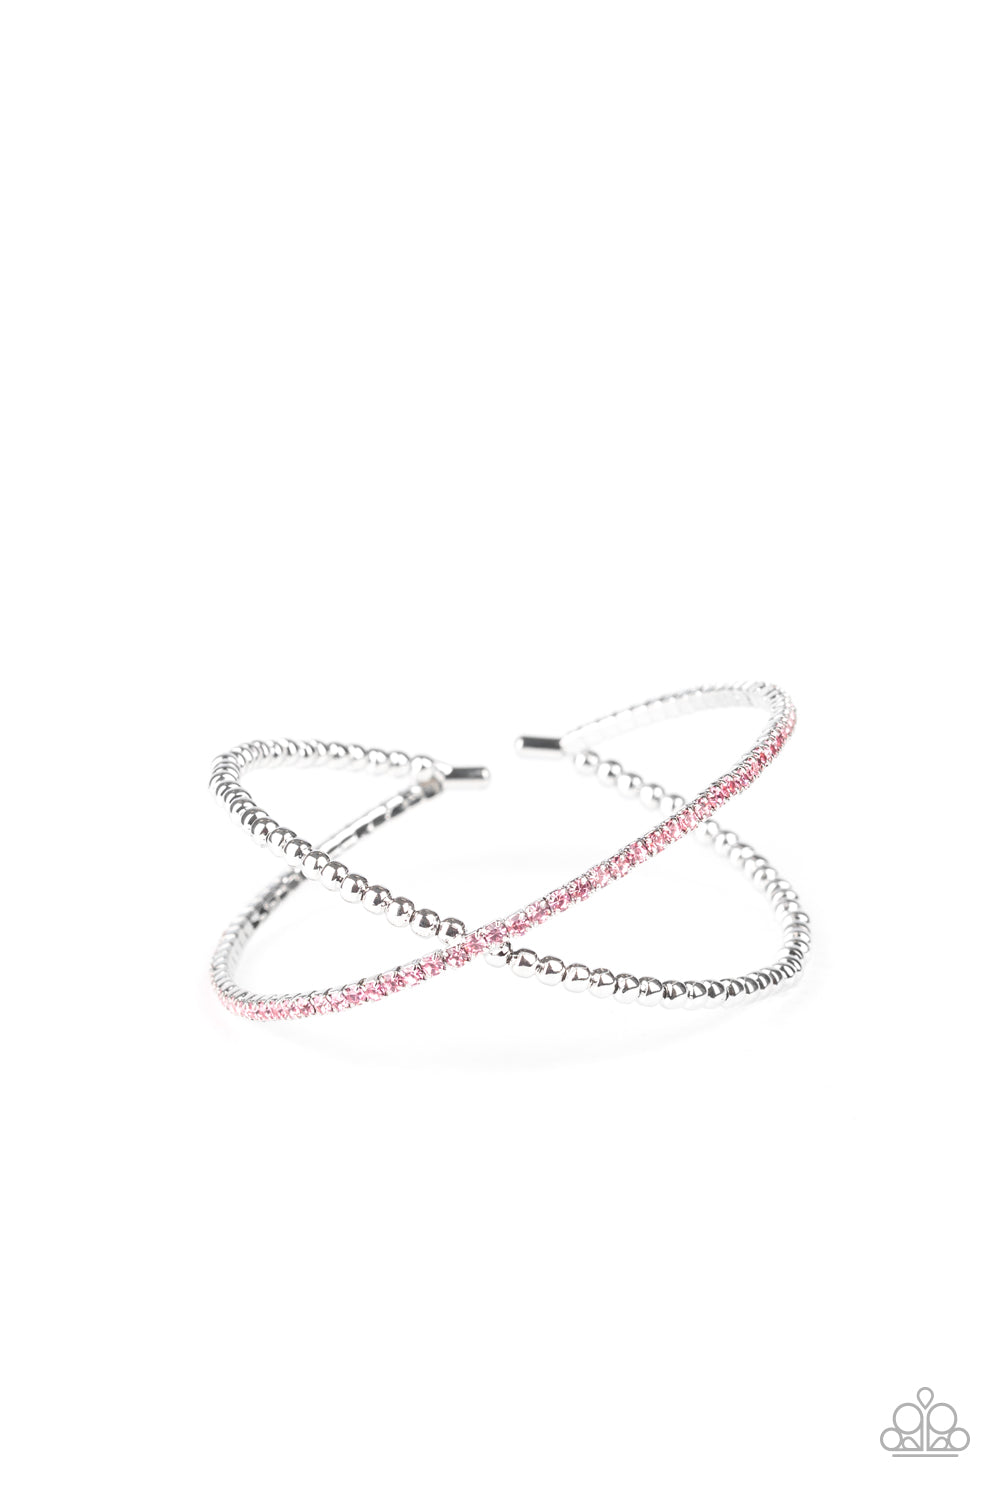 Chicly Crisscrossed - Pink